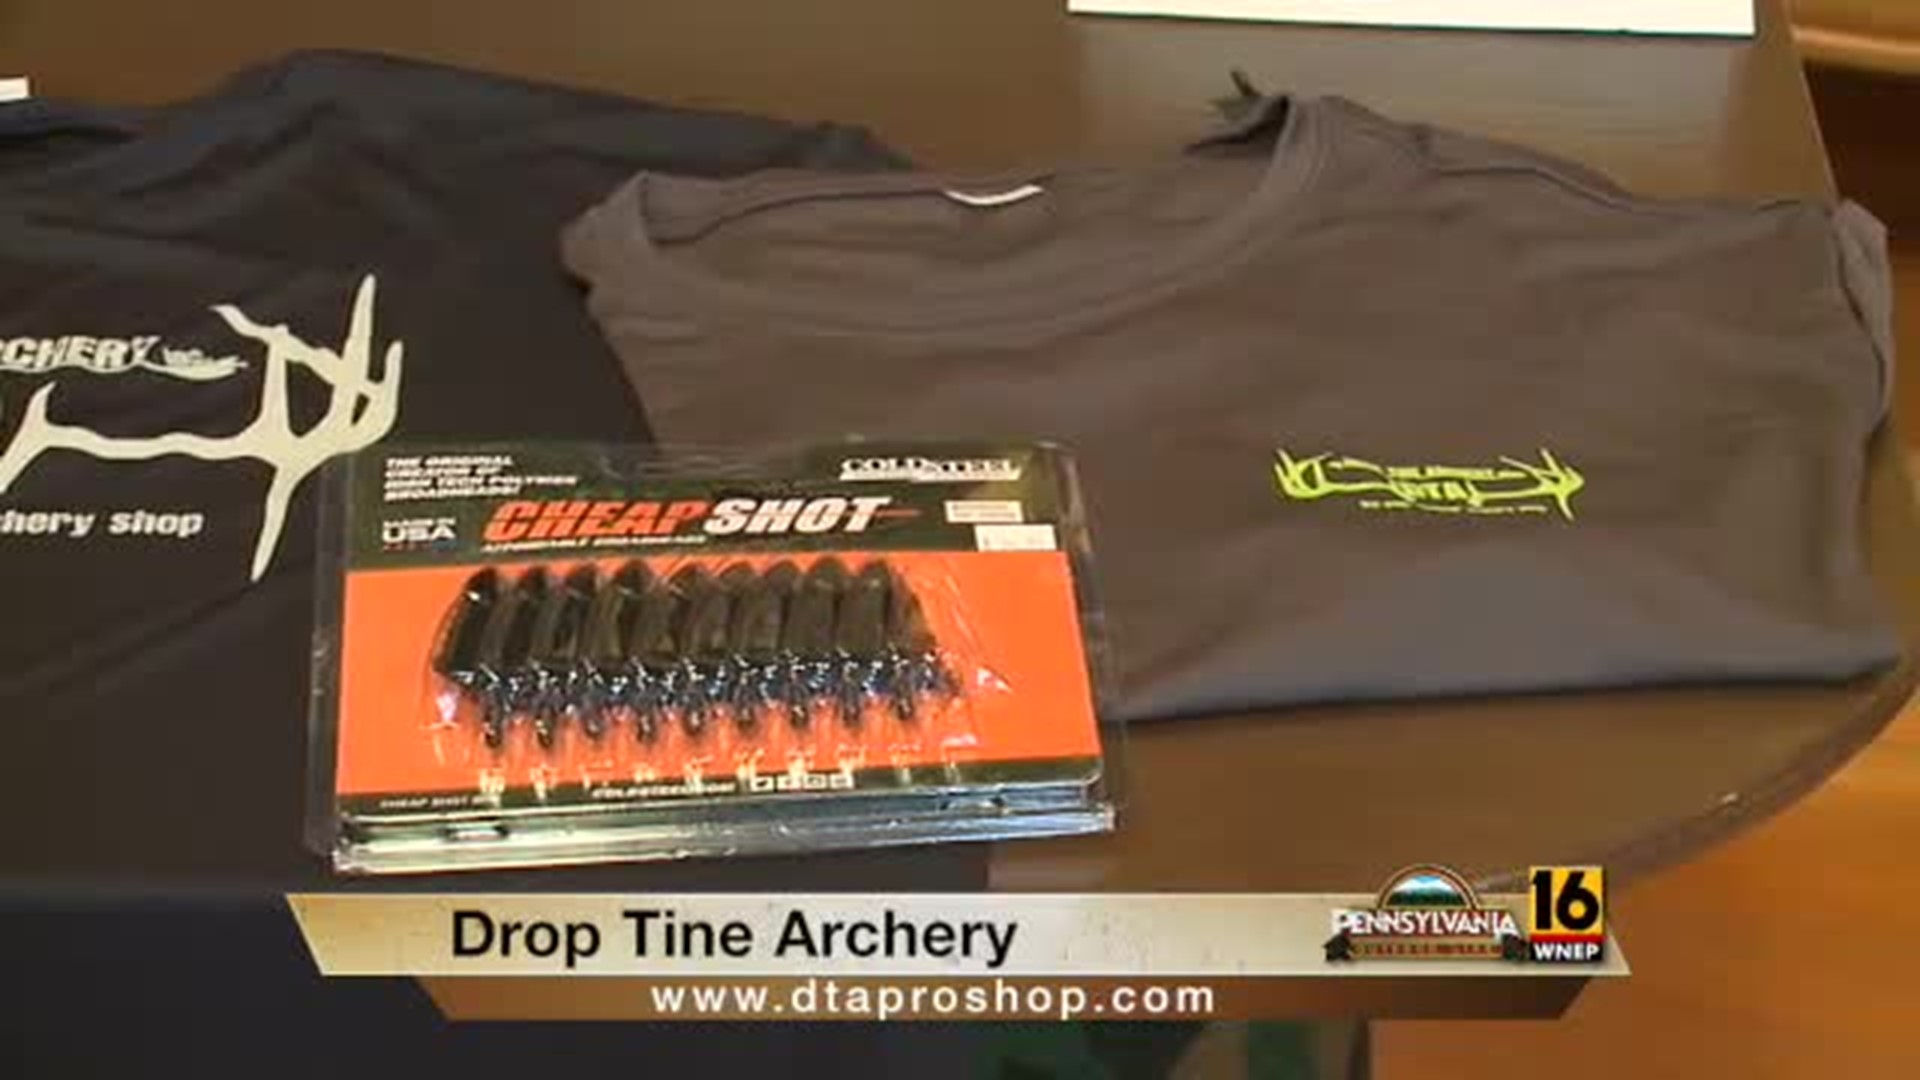 Drop Tine Archery Product Giveaway